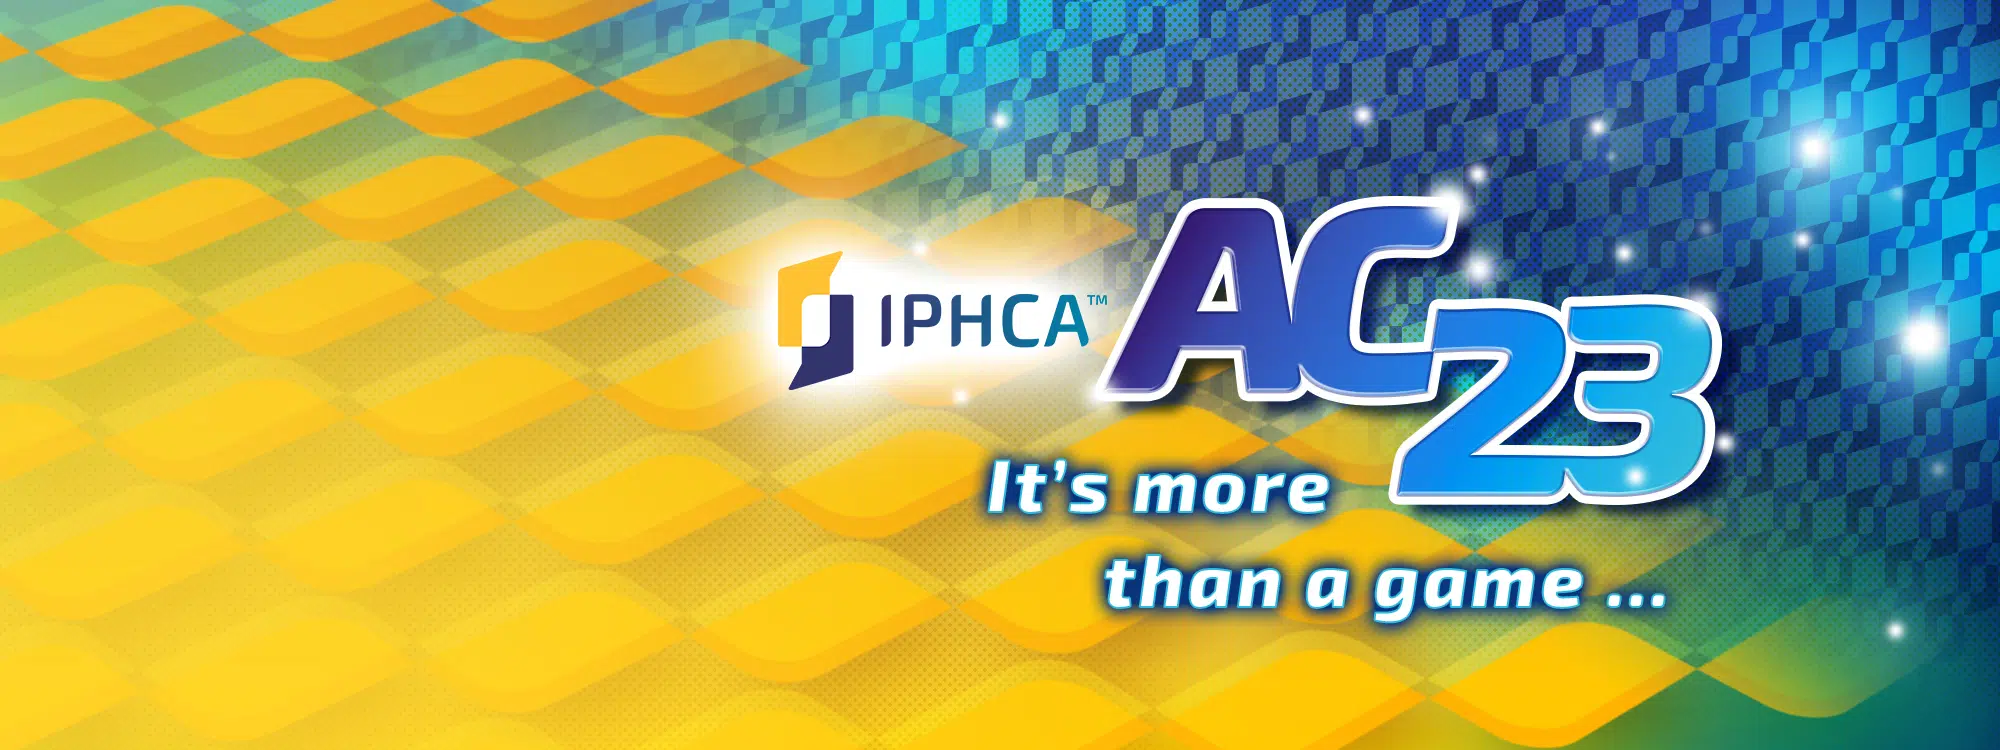 IPHCA Annual Conference 2023 header 1